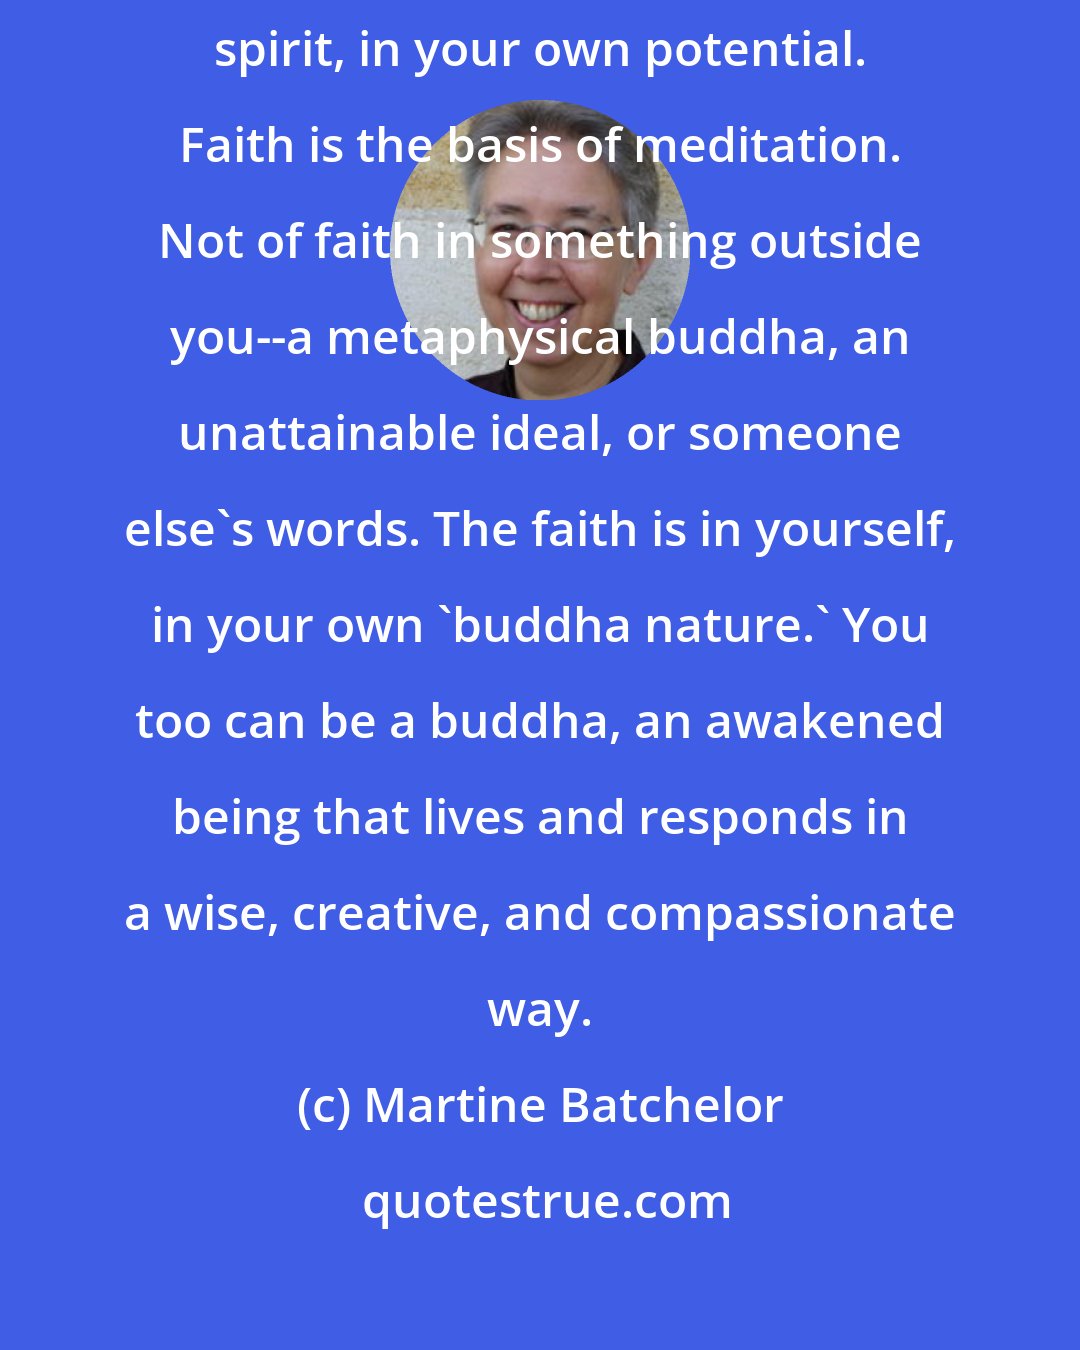 Martine Batchelor: An act of meditation is actually an act of faith--of faith in your spirit, in your own potential. Faith is the basis of meditation. Not of faith in something outside you--a metaphysical buddha, an unattainable ideal, or someone else's words. The faith is in yourself, in your own 'buddha nature.' You too can be a buddha, an awakened being that lives and responds in a wise, creative, and compassionate way.